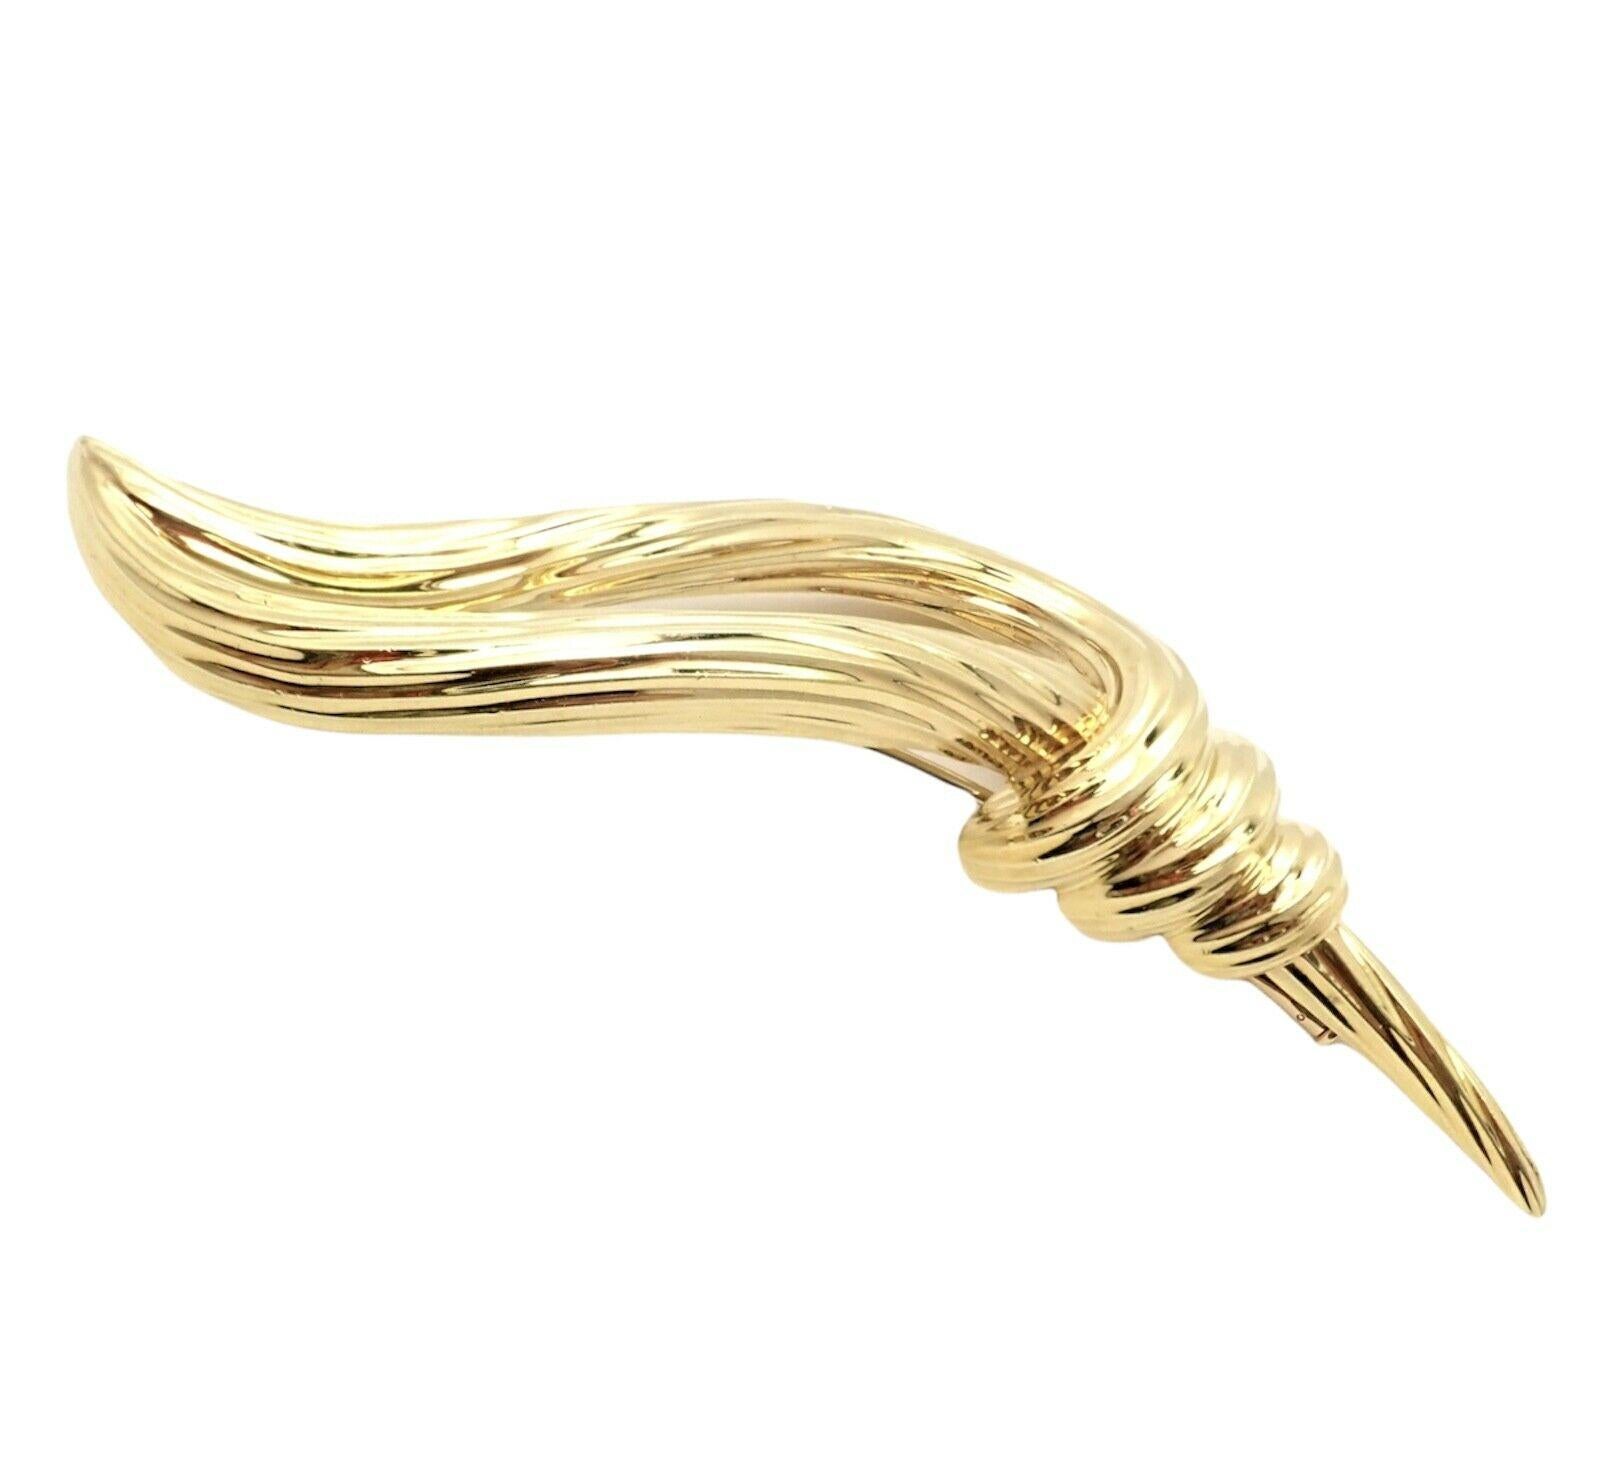 Henry Dunay Olympic Torch Yellow Gold Pin Brooch In Excellent Condition For Sale In Holland, PA